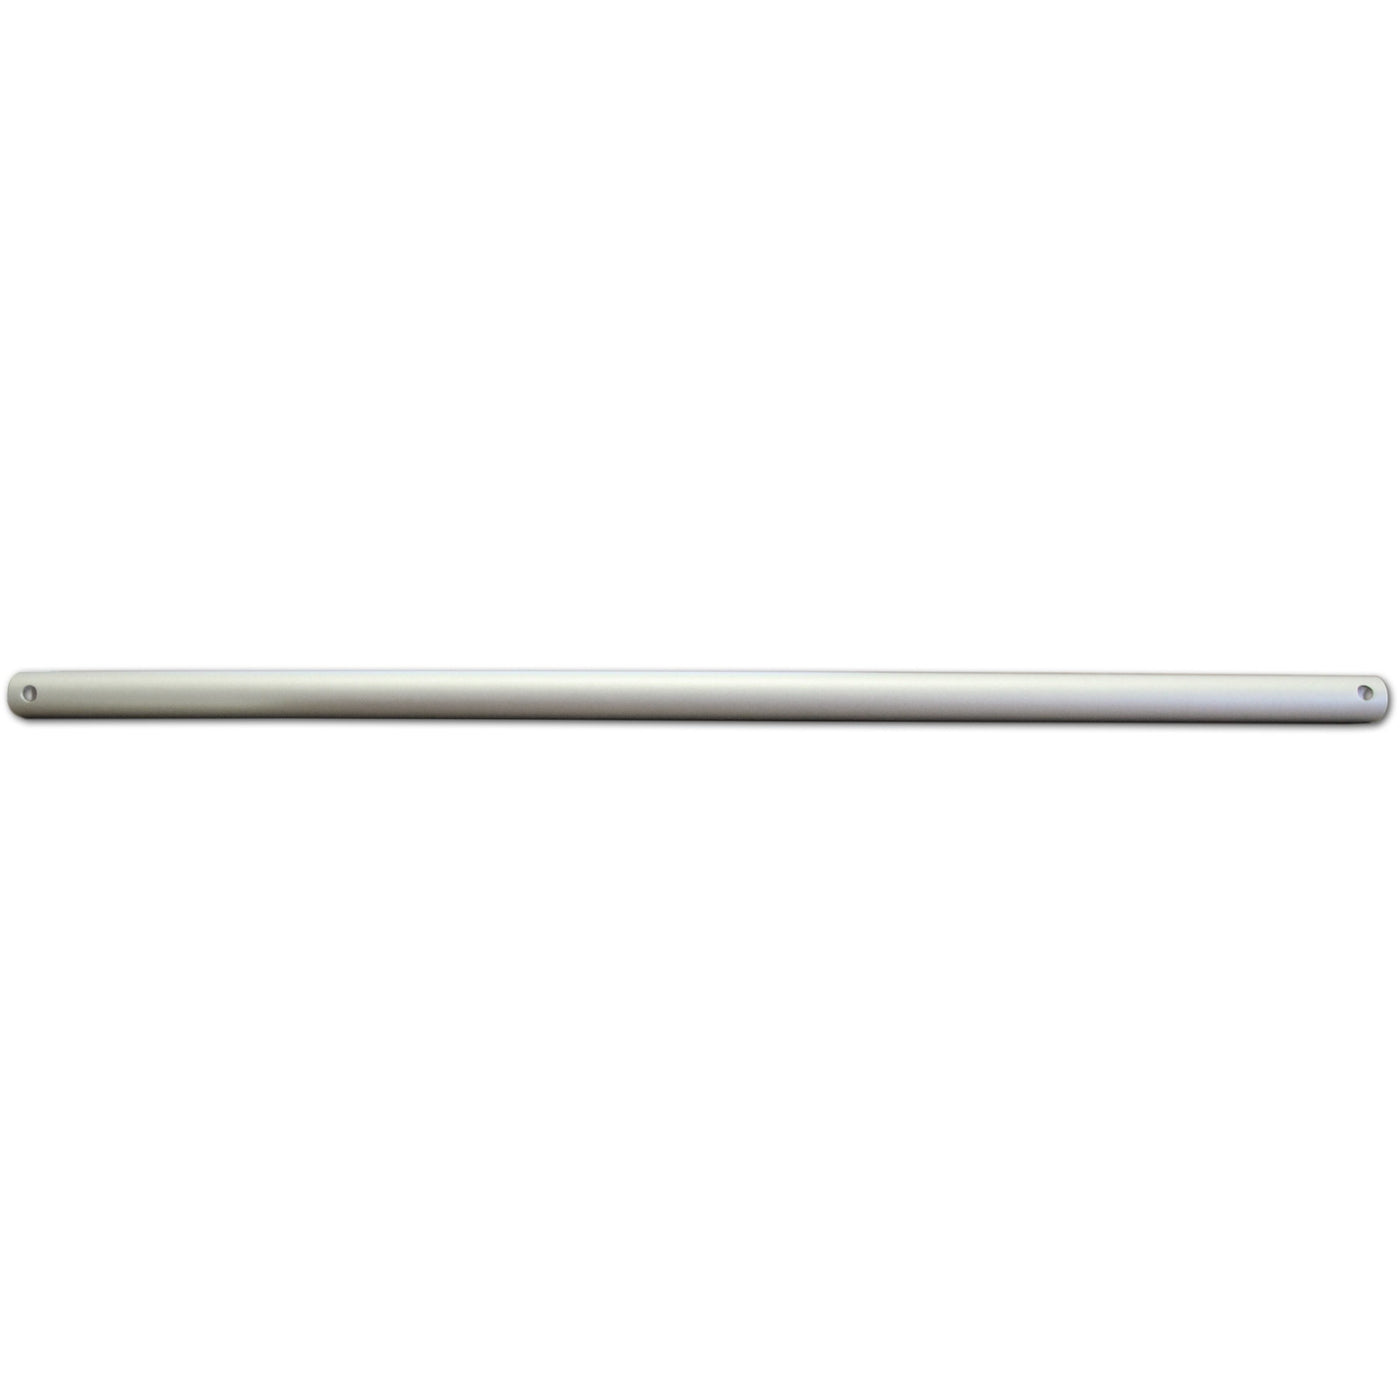 12 in. extension pole in brushed nickel finish.